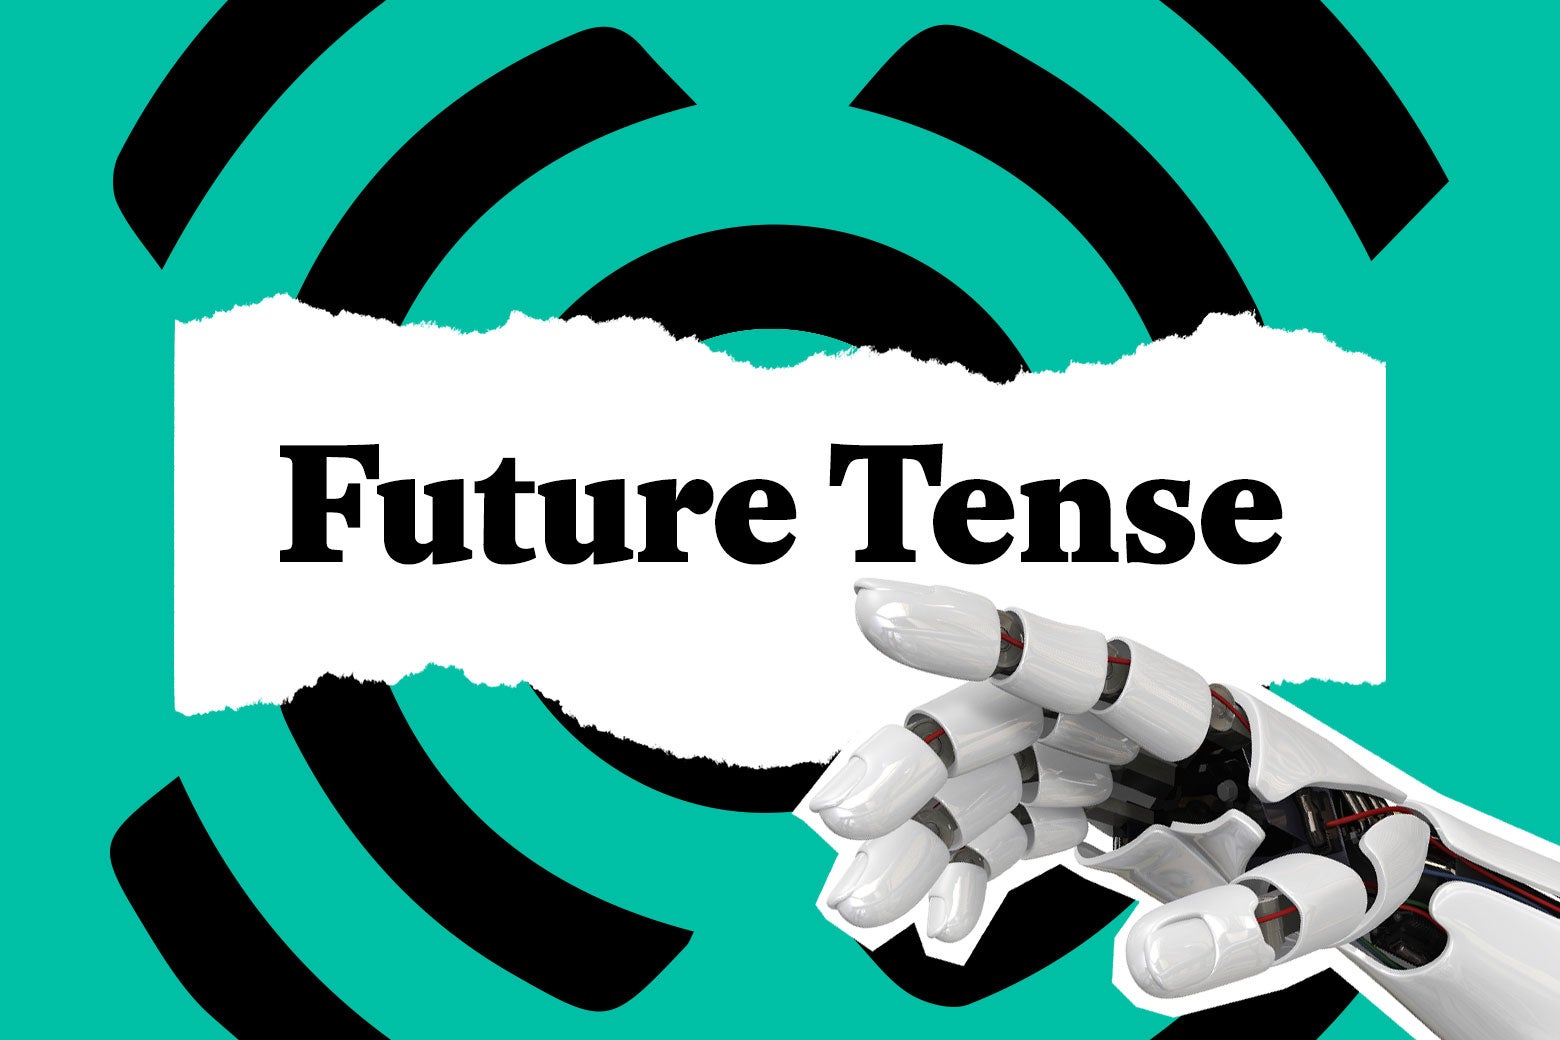 Sign up for the Future Tense newsletter, Slate's coverage of technology and our lives